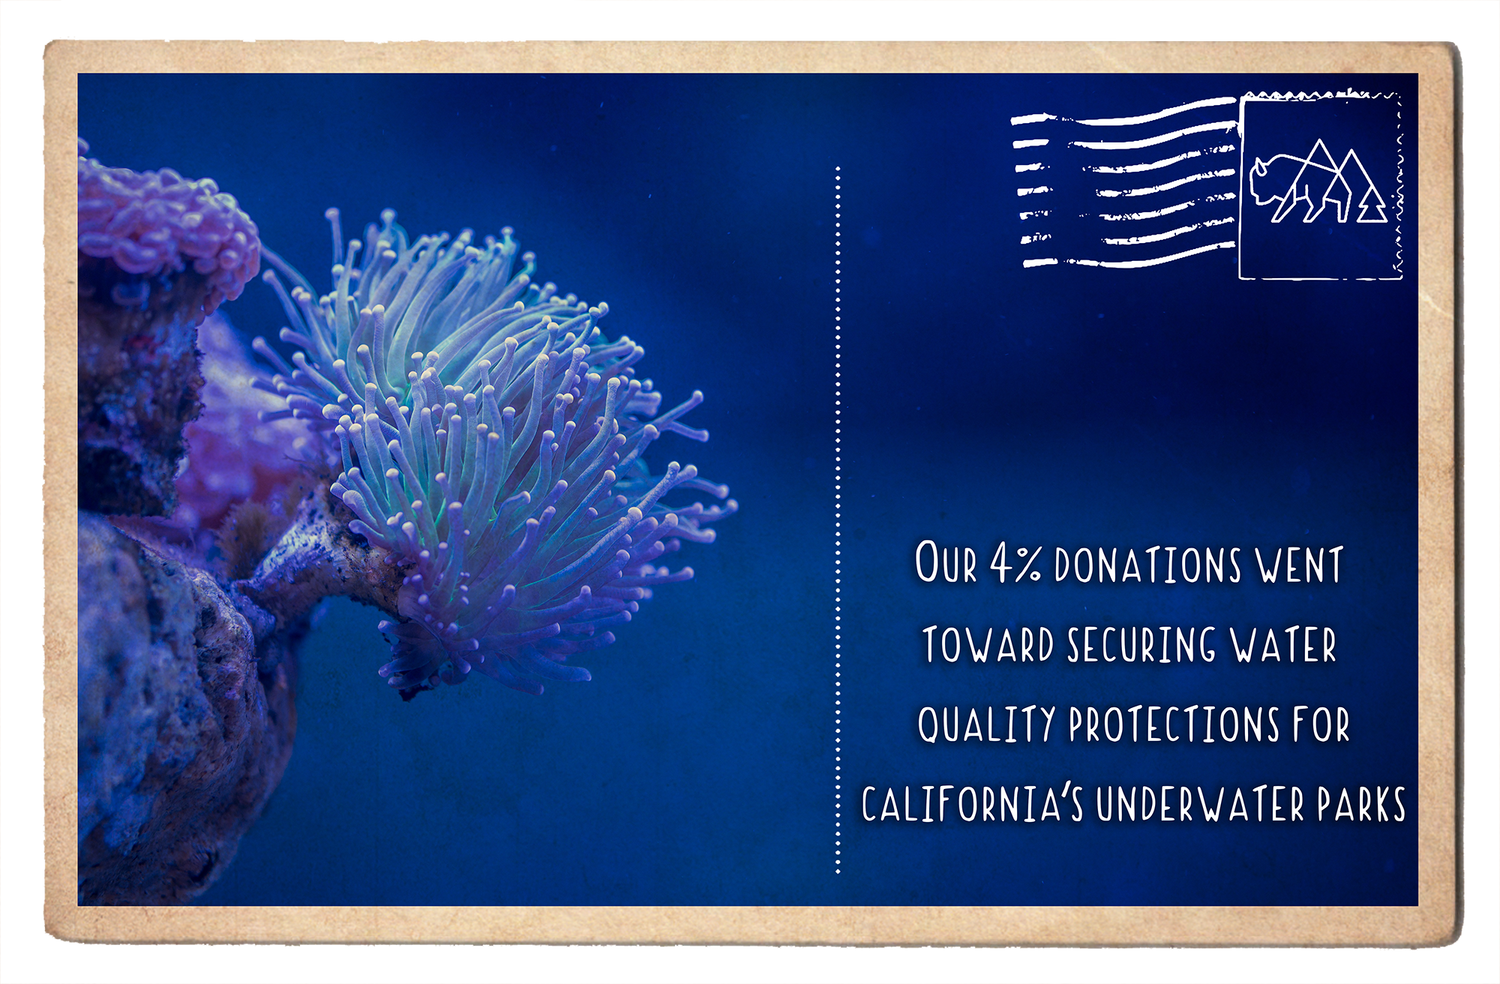 Securing Water Quality Protections for California's Underwater Parks